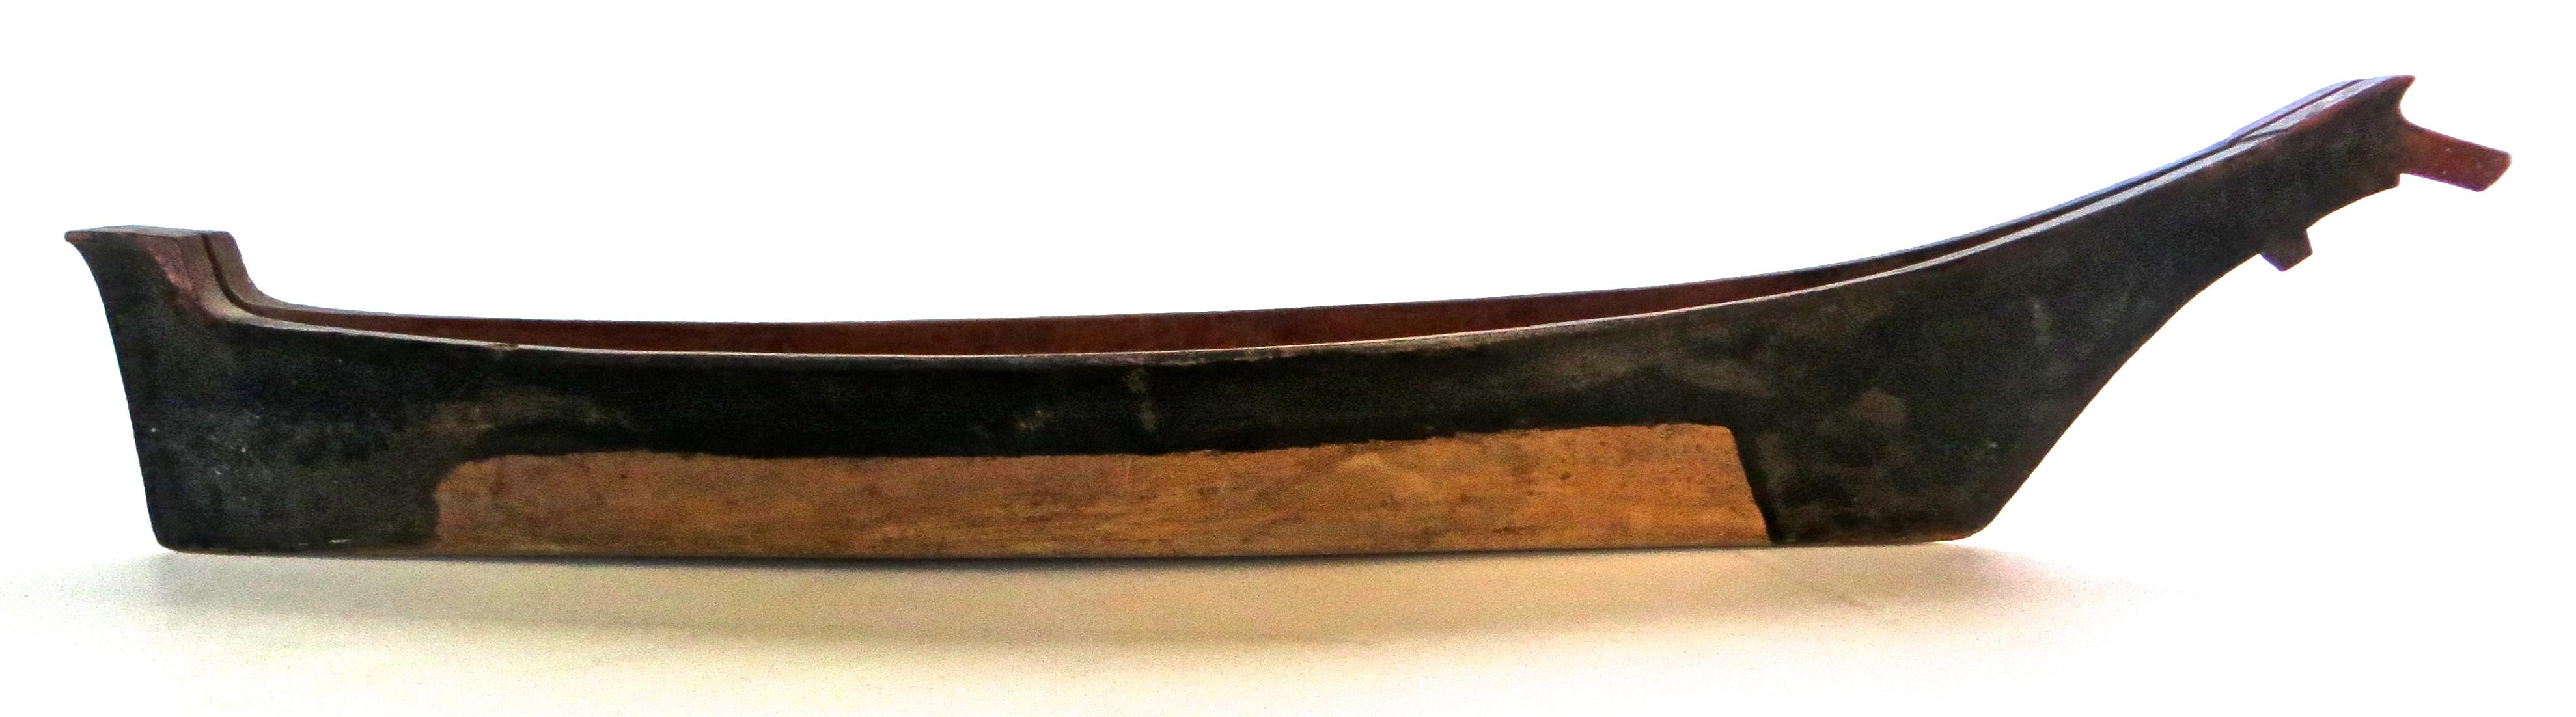 Native American Large Model Canoe by Native North American Indians, circa 1890